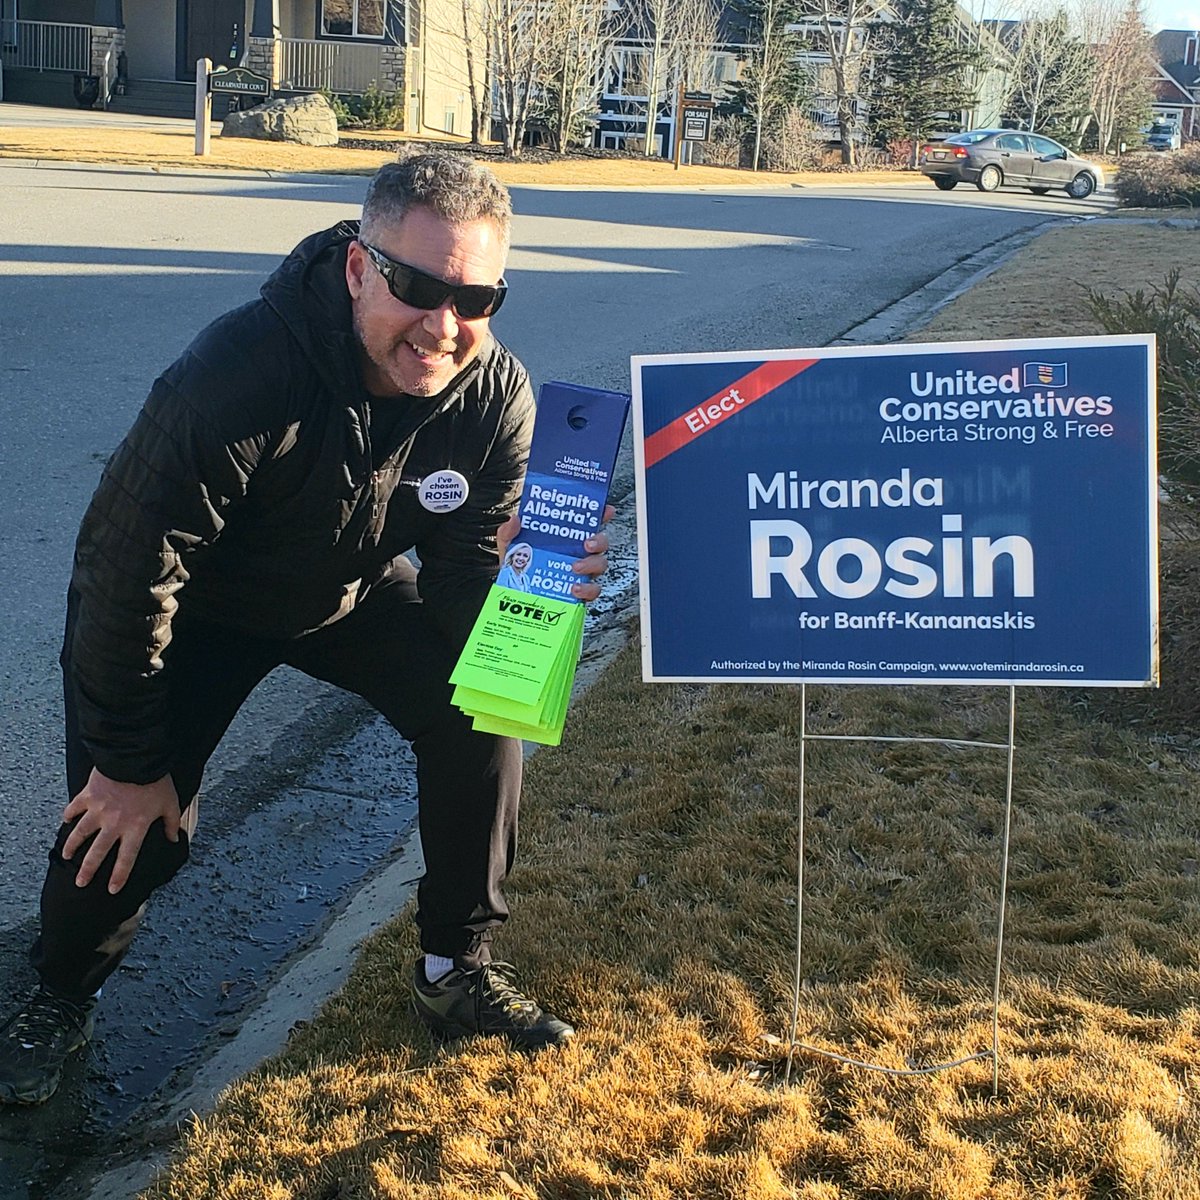 Had a wonderful evening meeting the people in neighborhood again tonight!

The support and encouragement for #BanffKananaskis #UCP candidate @MirandaRosin1 is overwhelming!!

Good exercise too!!!